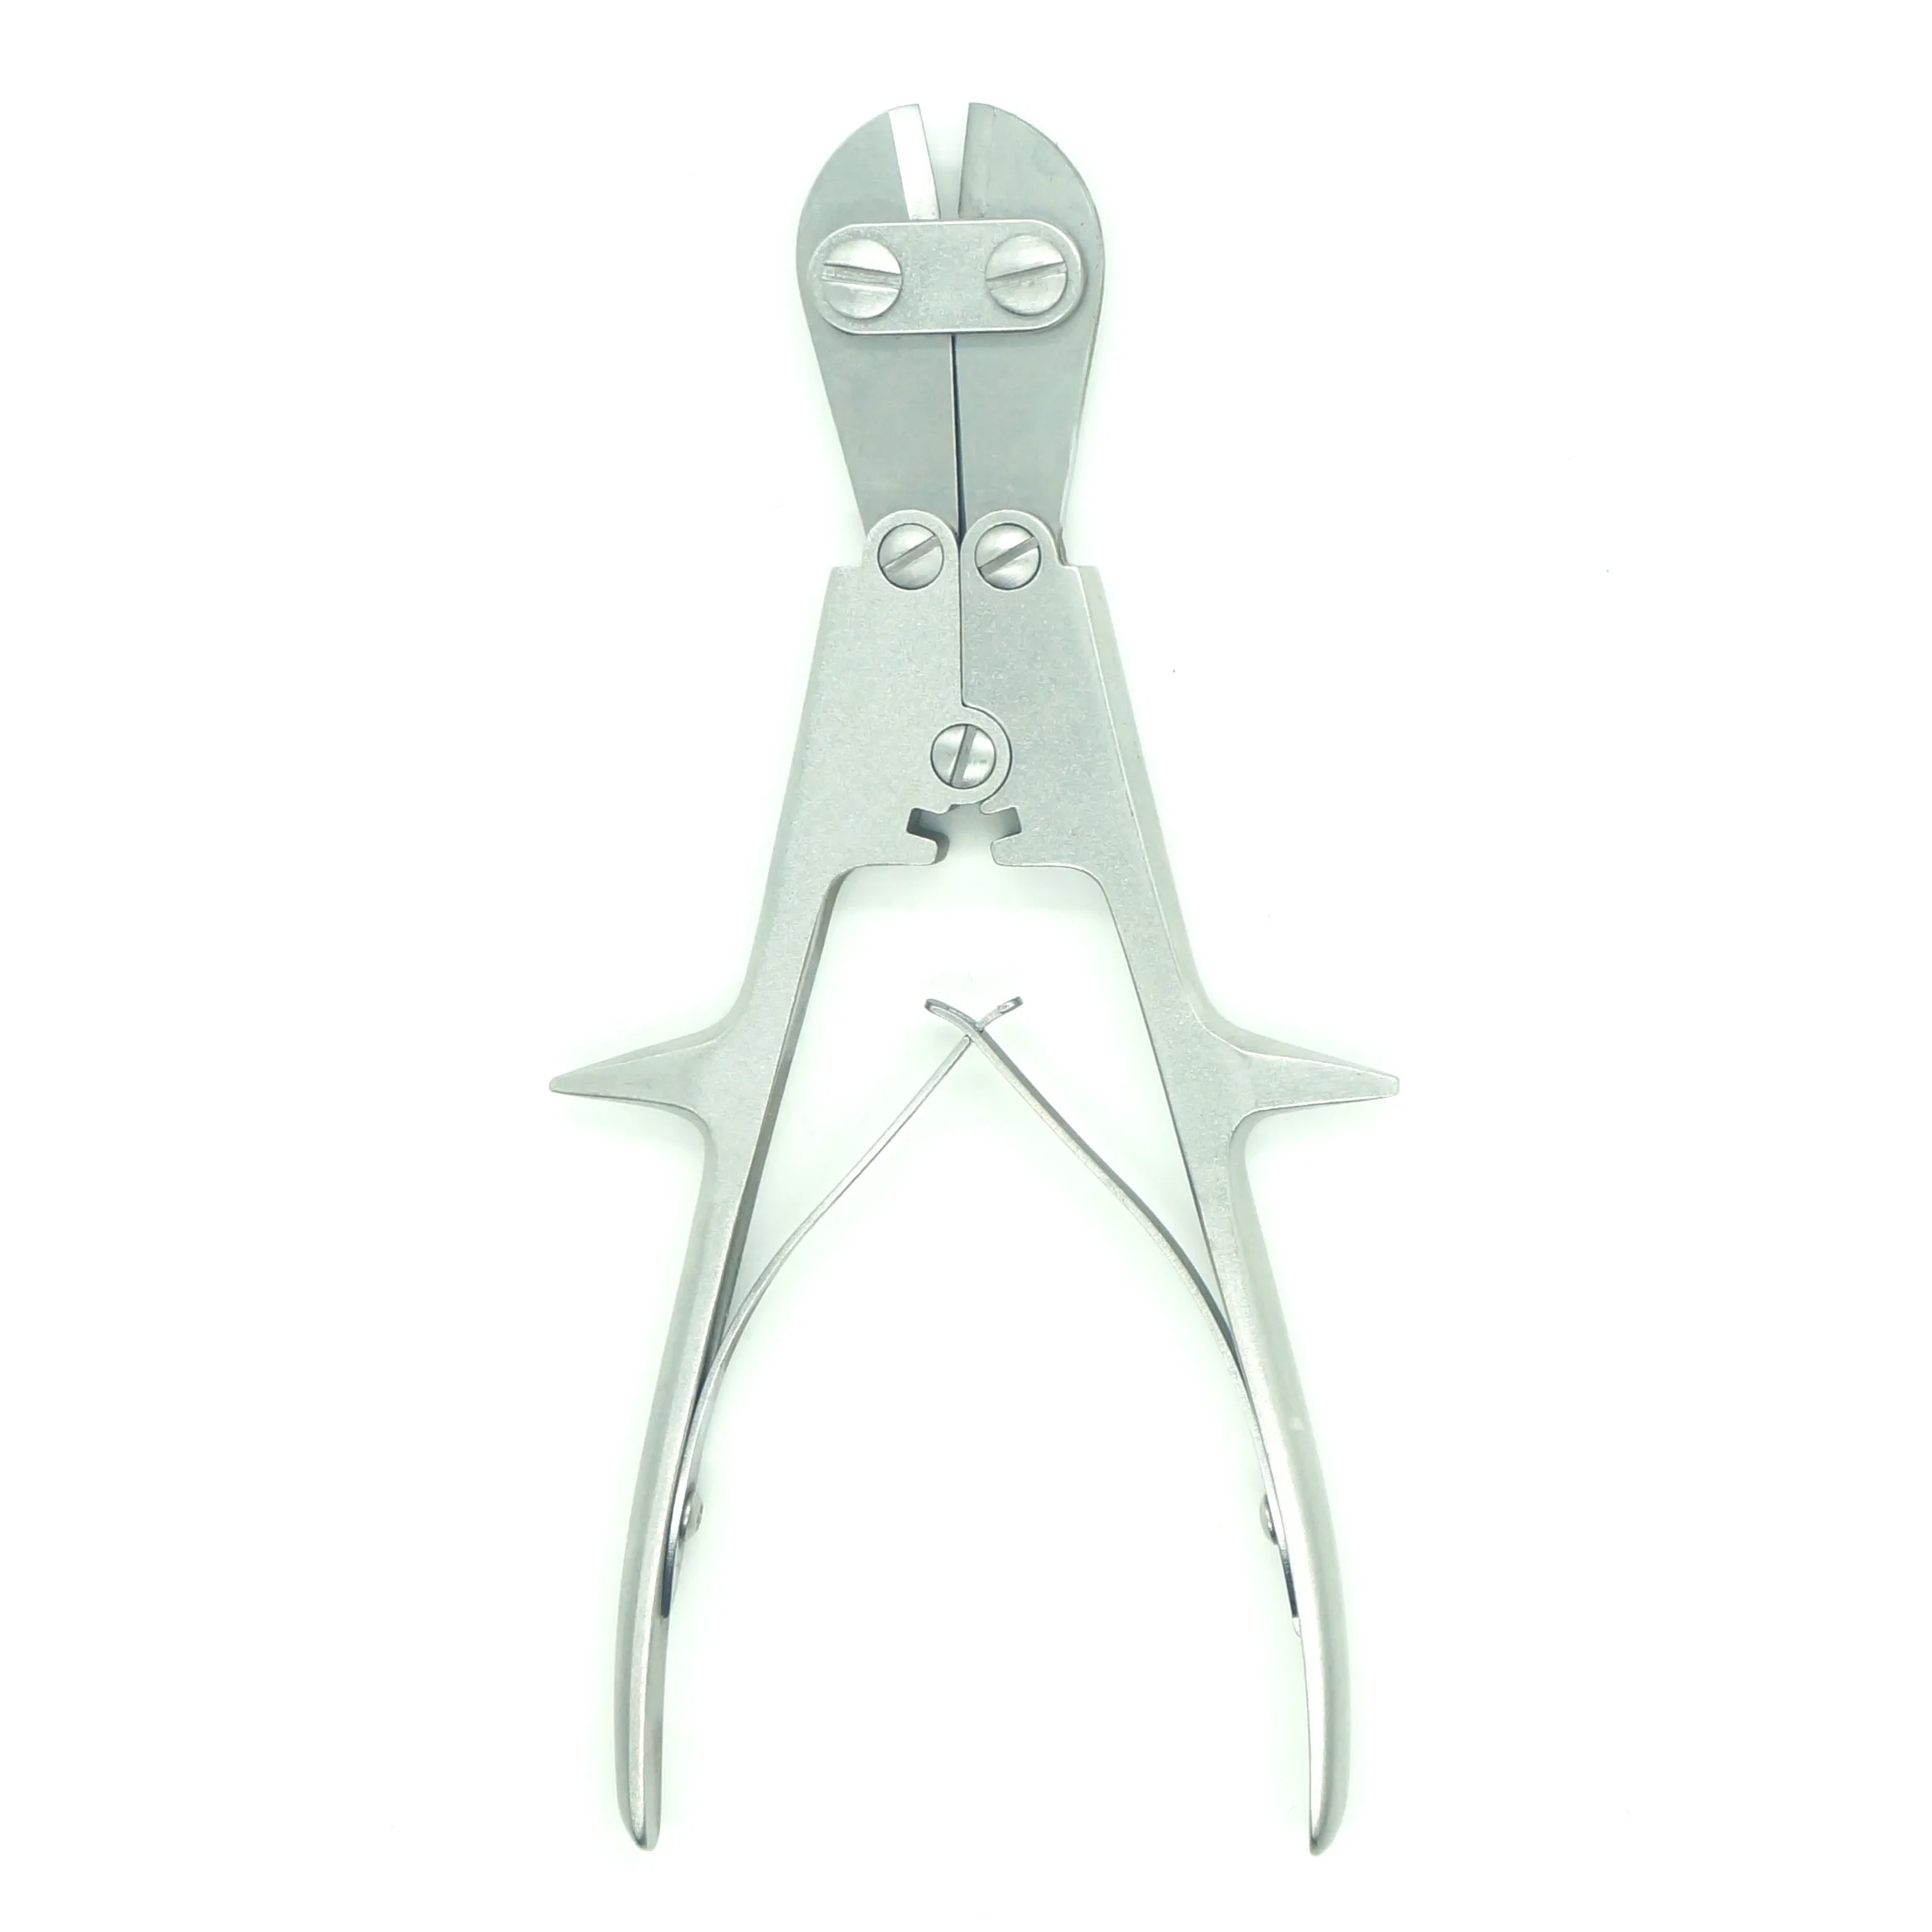 Veterinary Orthopedic Implant Cutting Wires Cutter Pliers Instruments